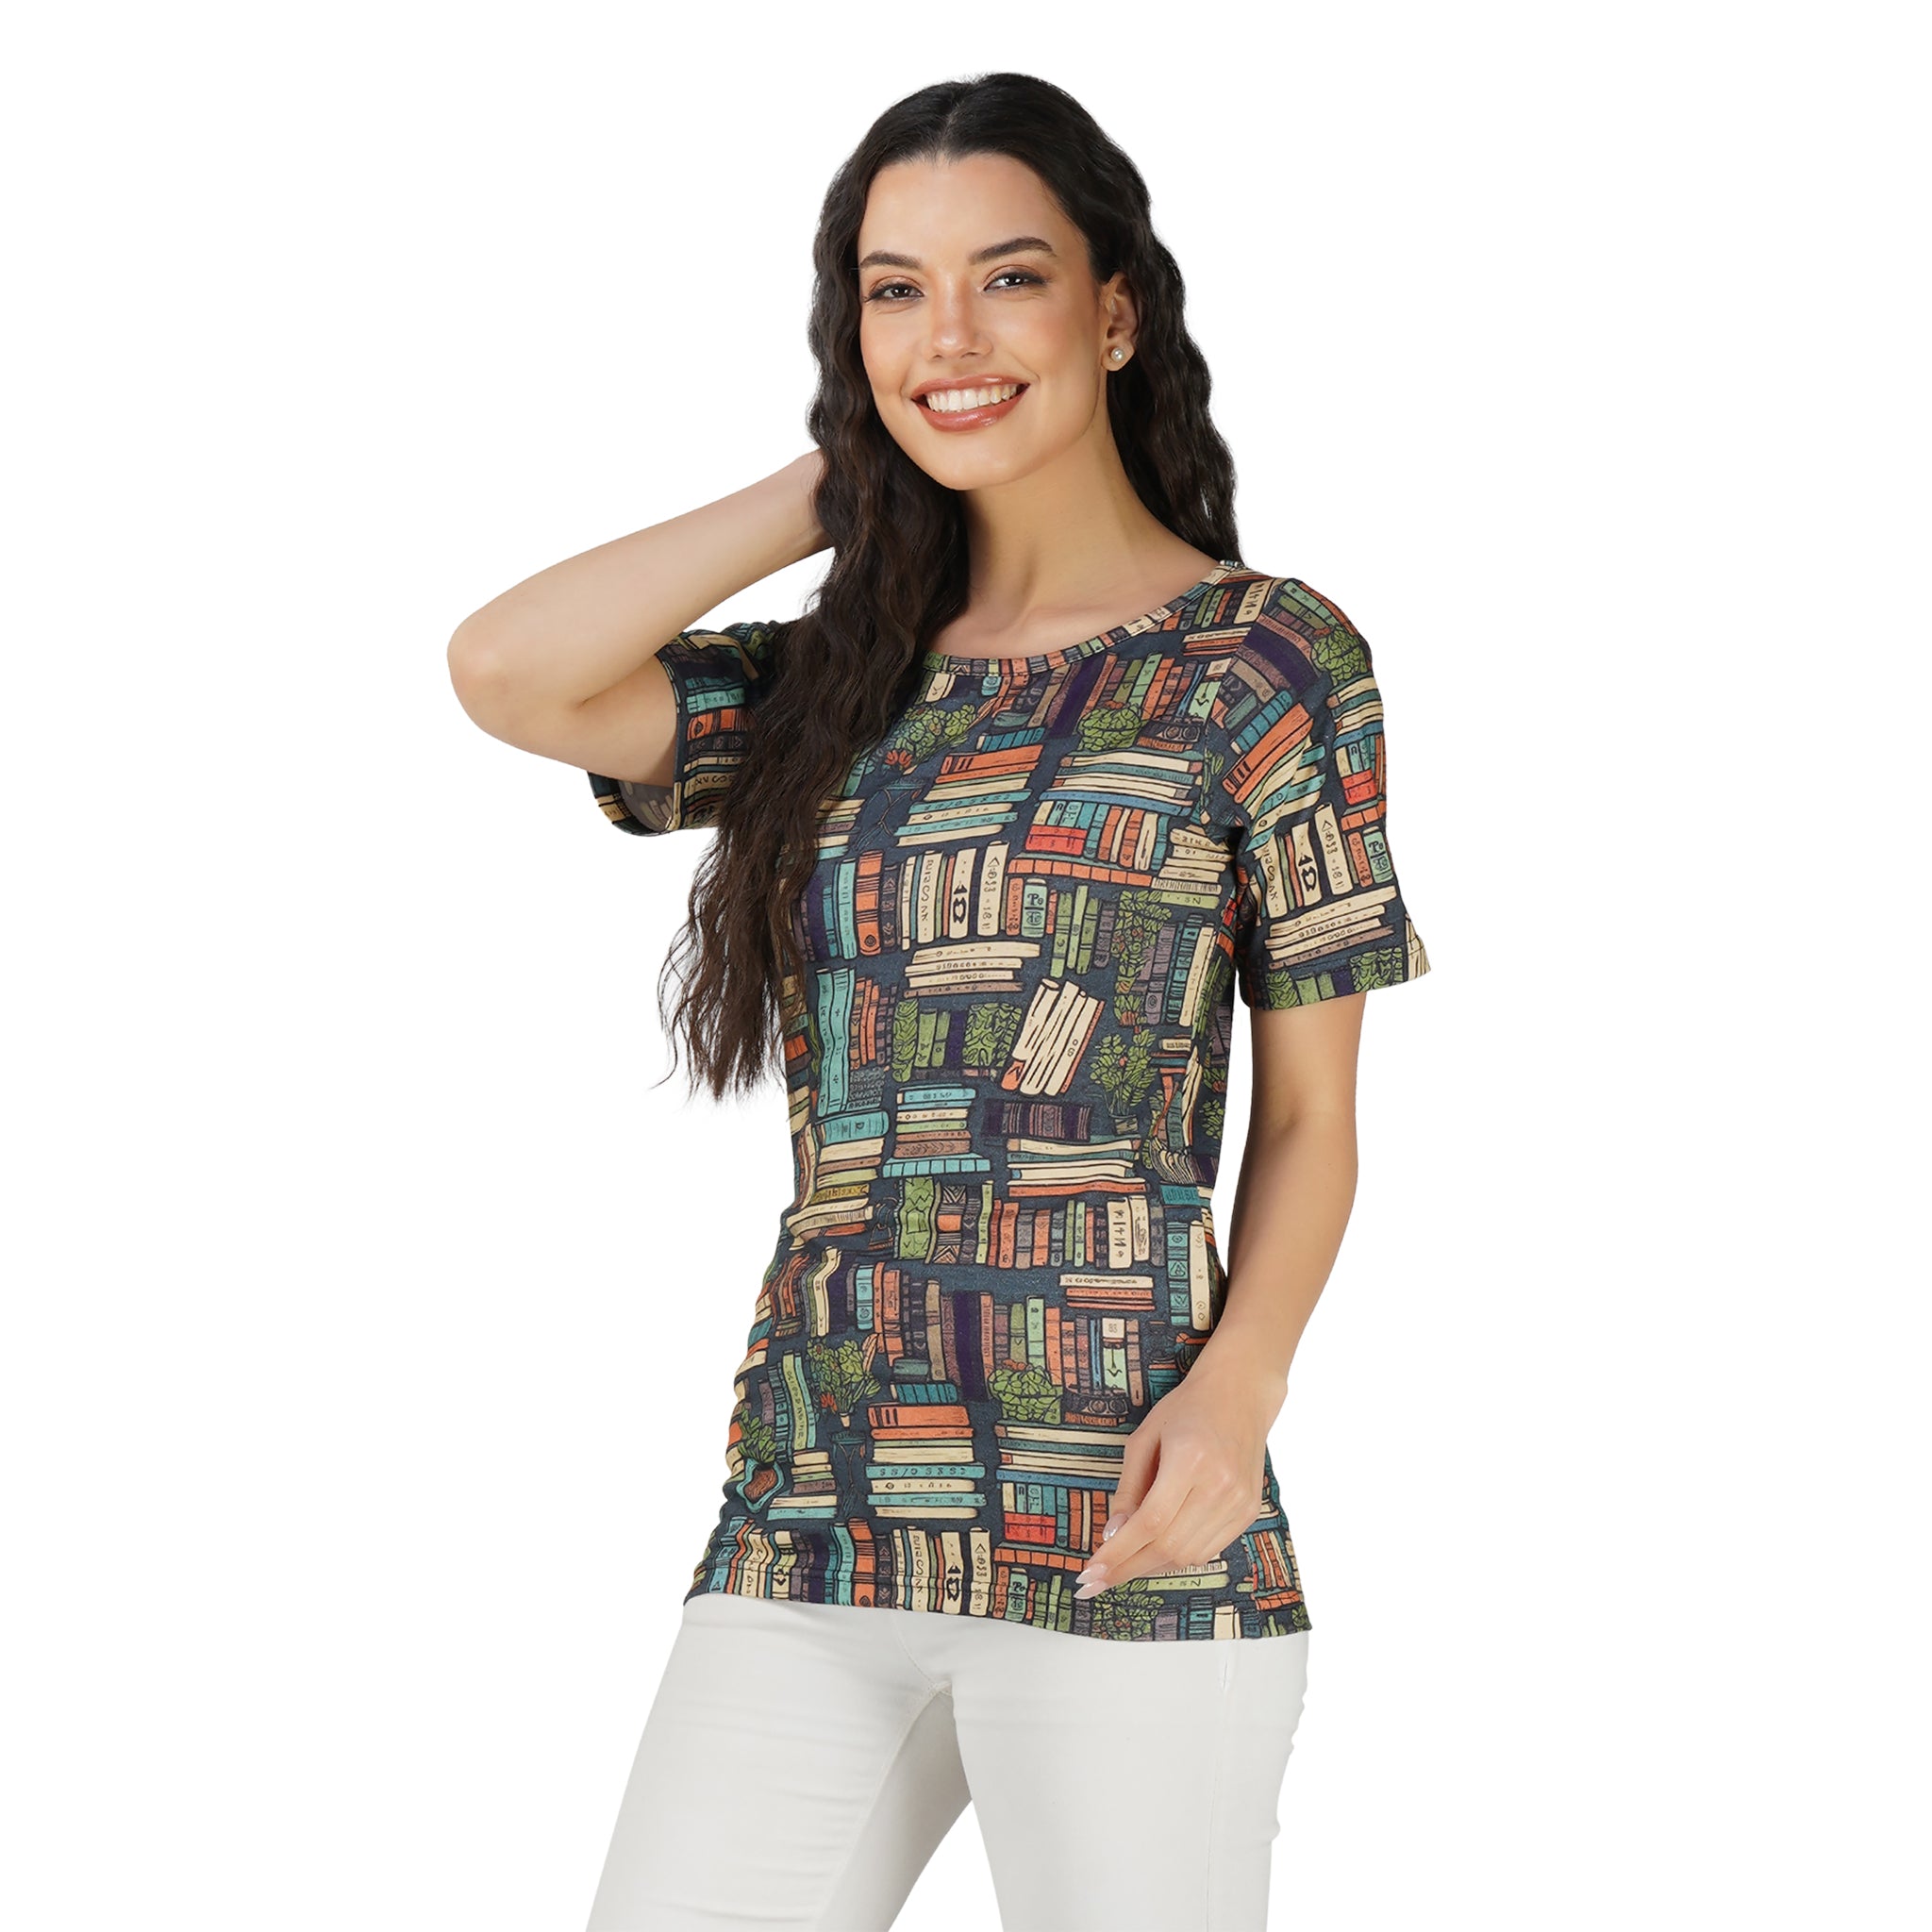 Botanical Library Tunic Top